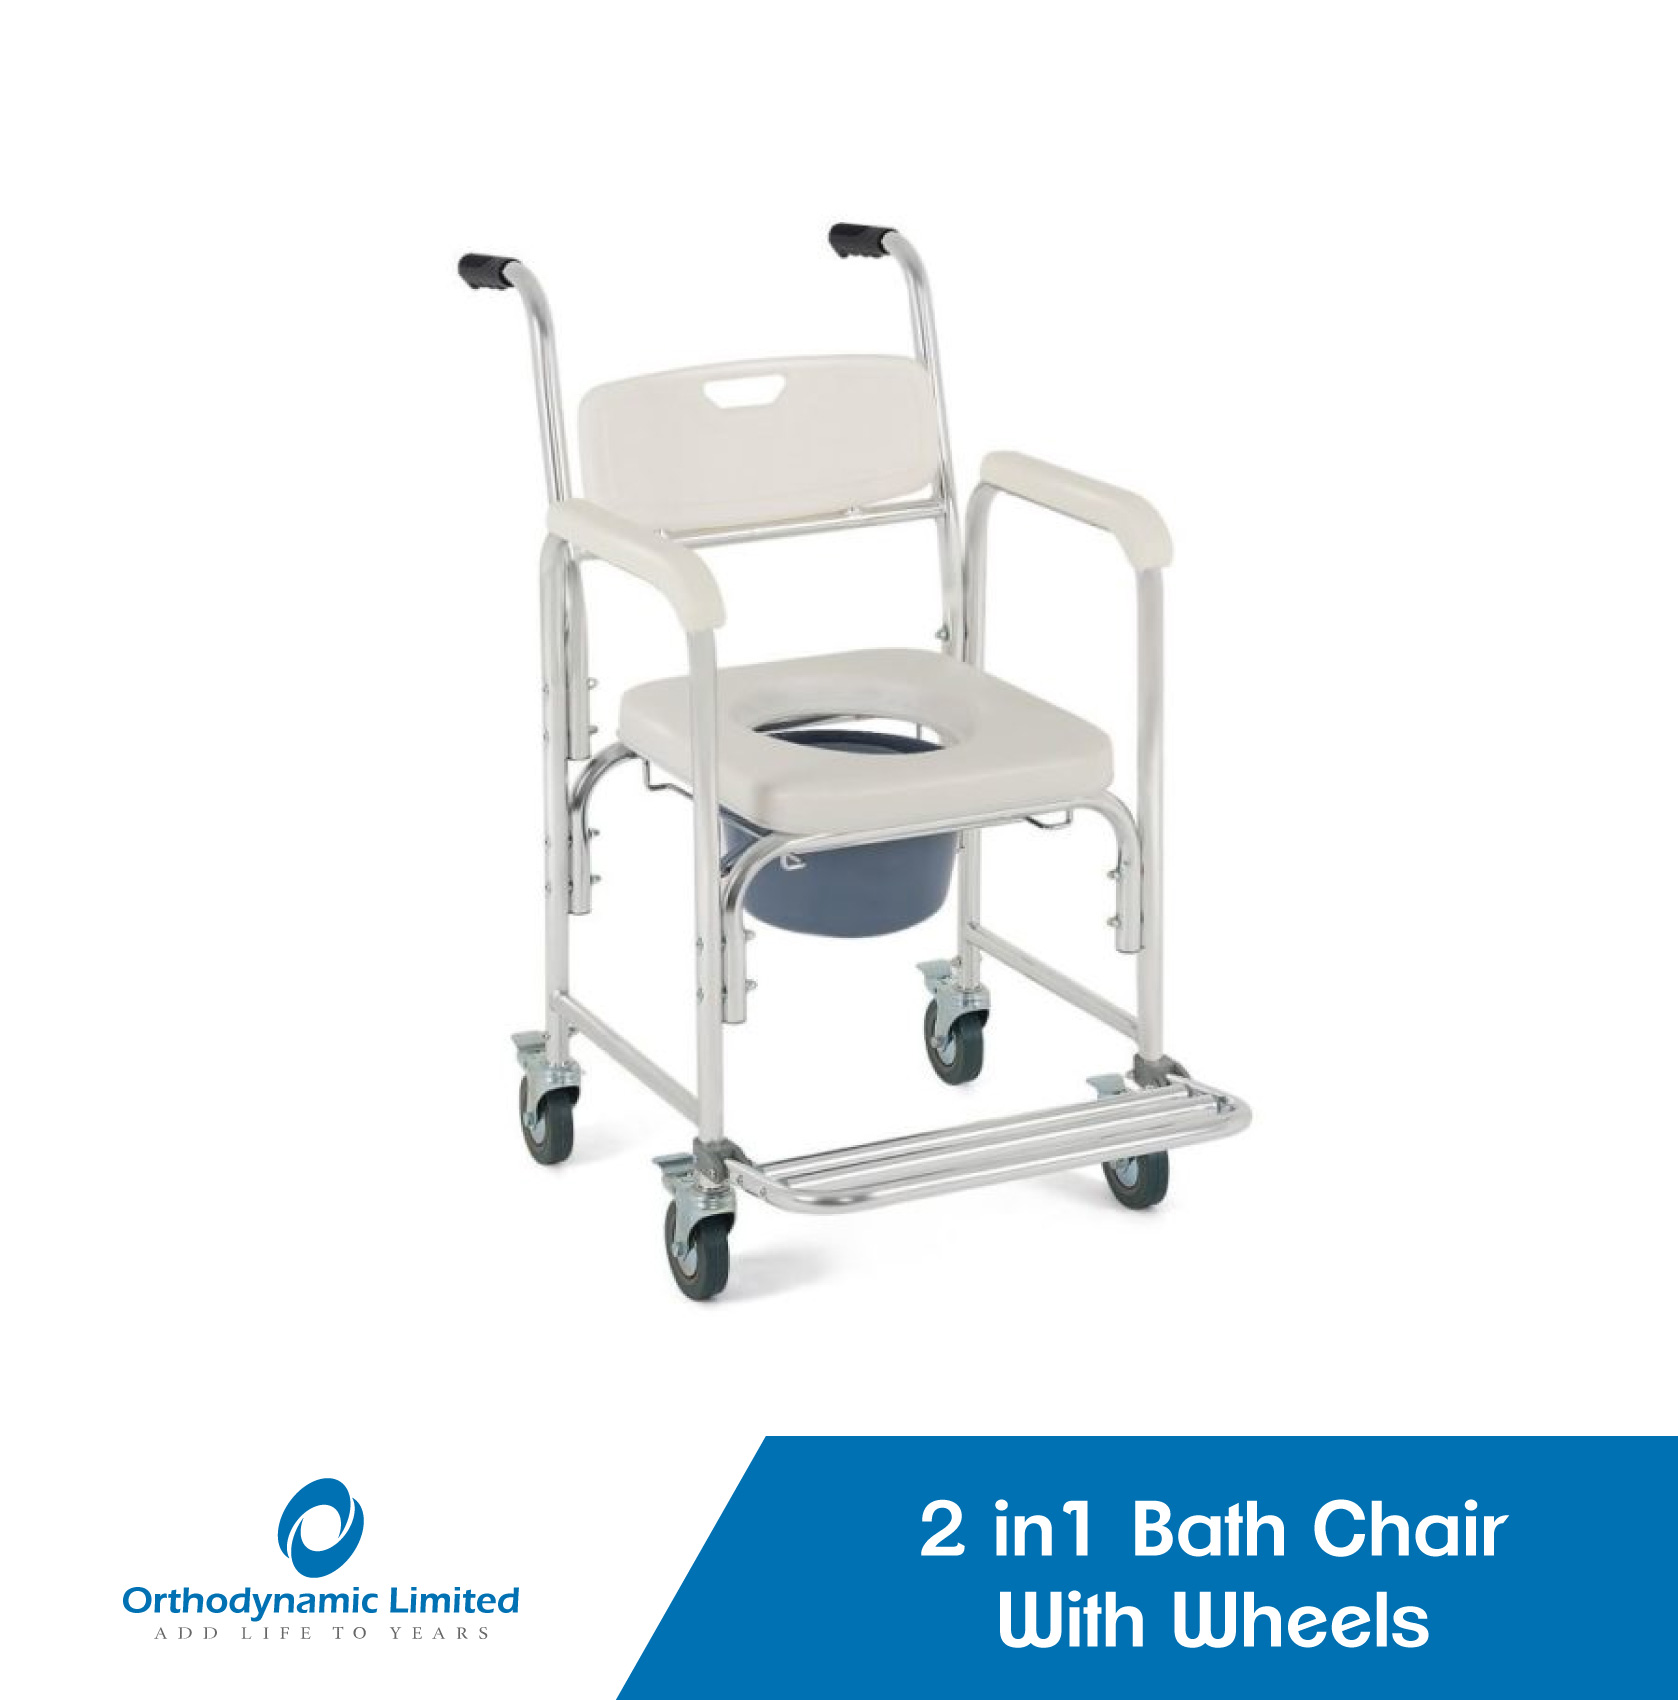 2 in1 bath chair with wheels